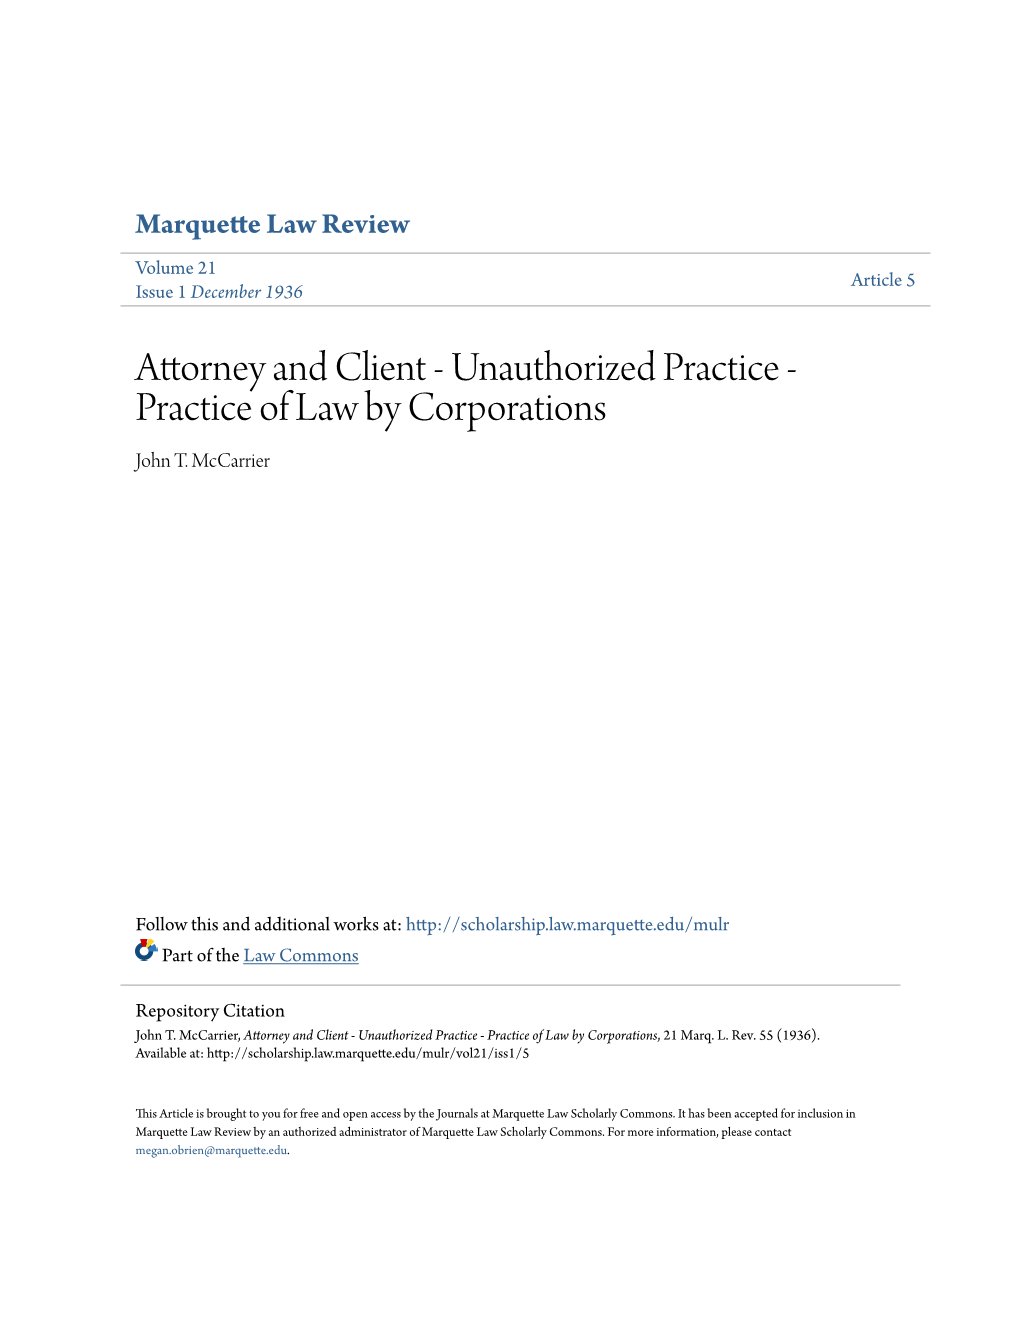 Attorney and Client - Unauthorized Practice - Practice of Law by Corporations John T